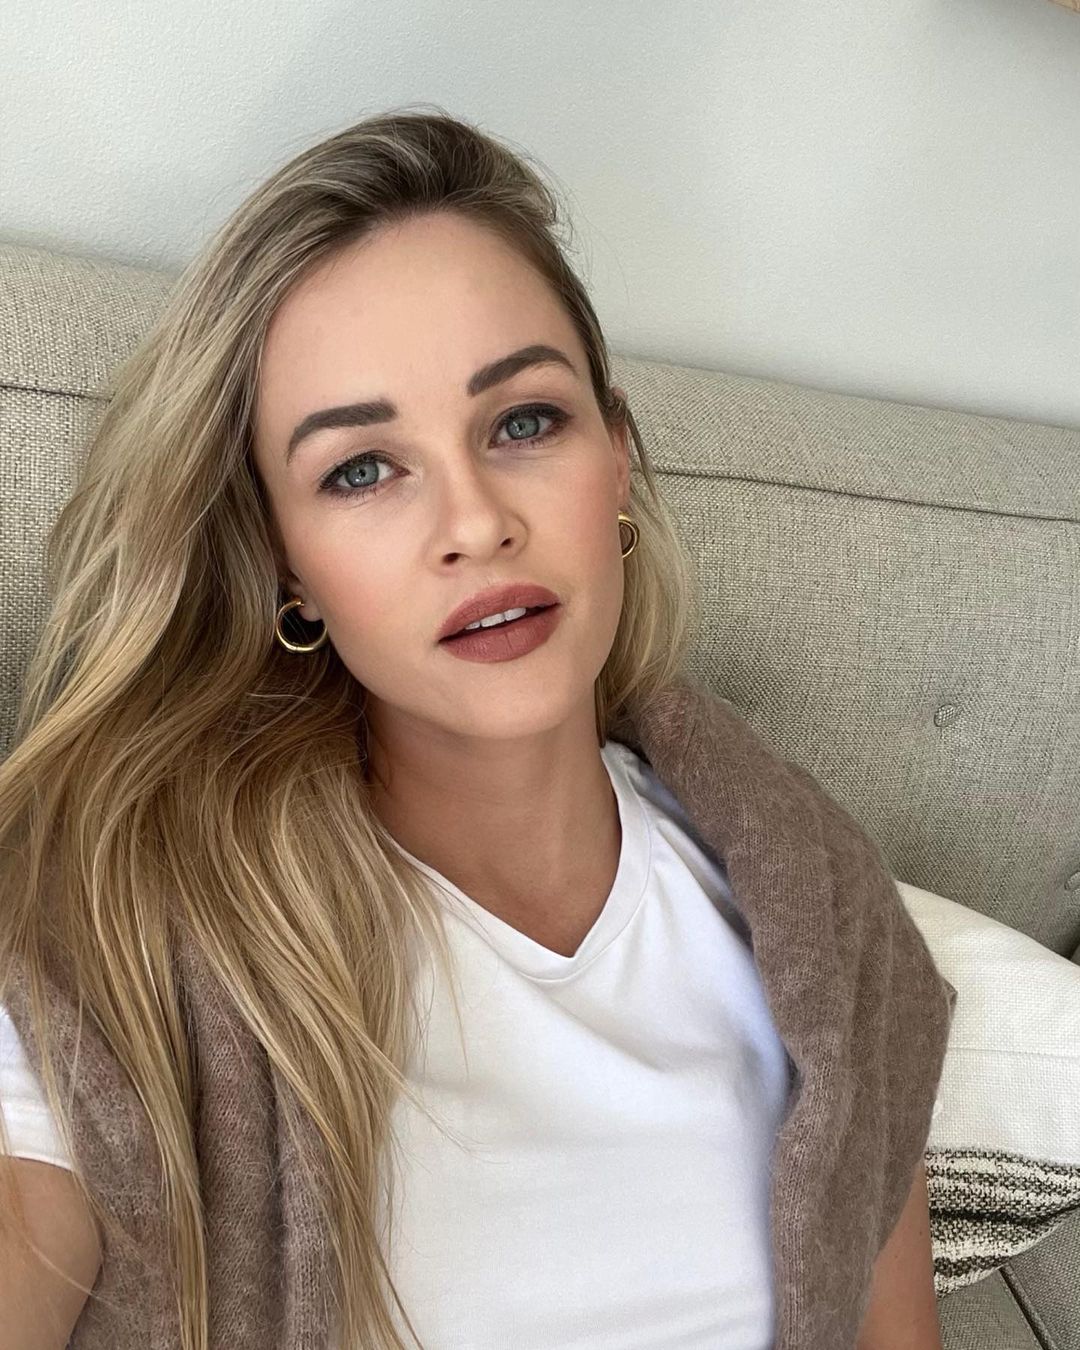 Ambyr Childers wearing a white top and taking selfie